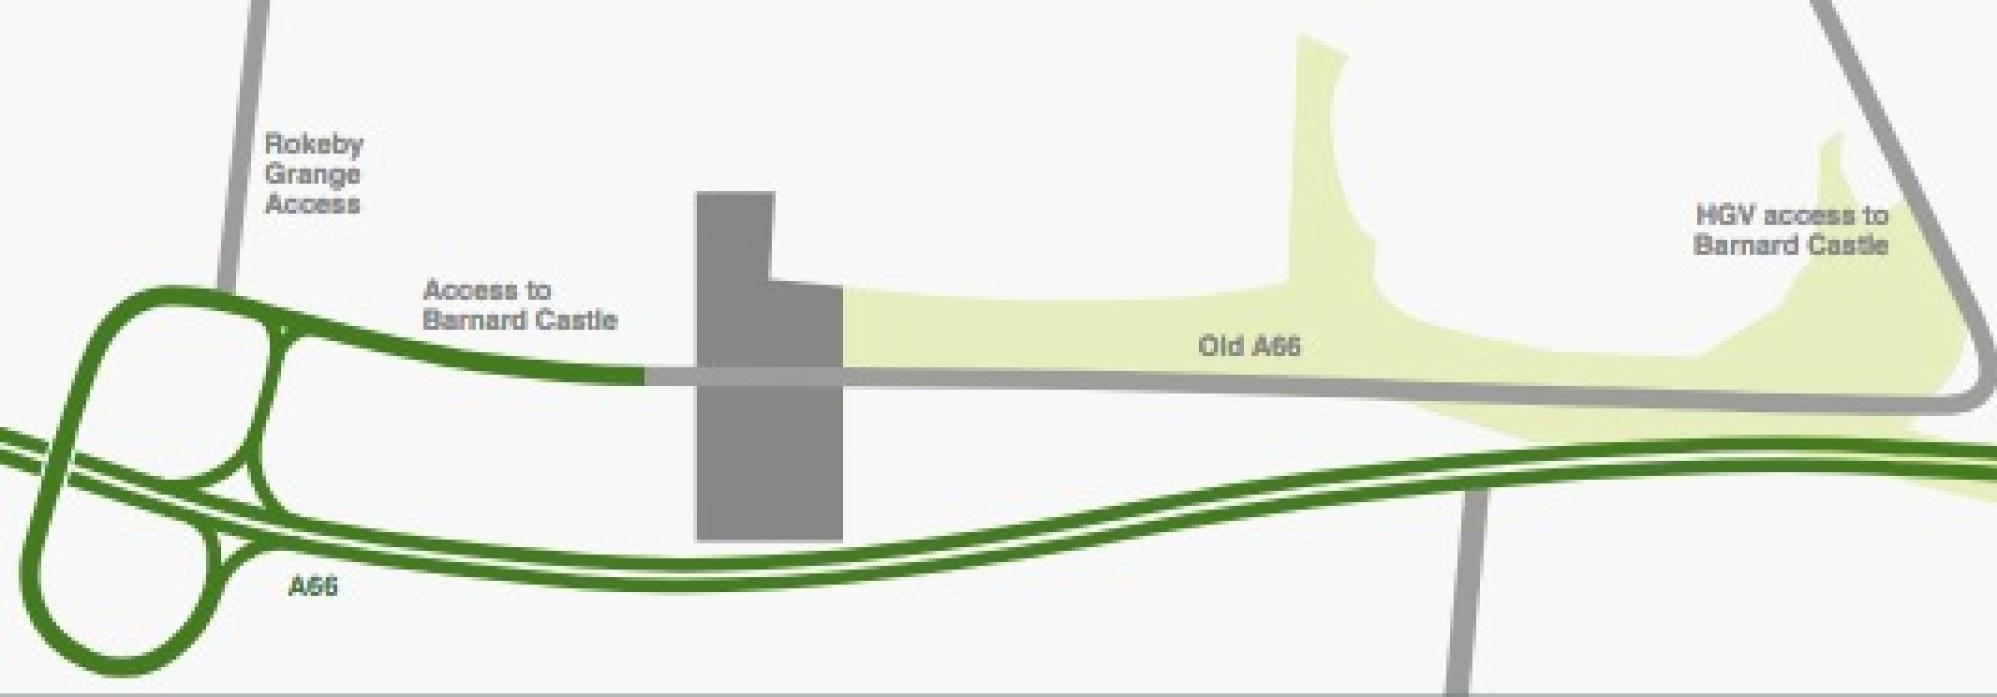 U-TURN CONSIDERED: The current proposed route of the A66 at Rokeby. The route to Barnard Castle would be for HGVs. Cars would go via Cross Lanes where a new junction is planned. However, this would lead to an increase in traffic through Startforth and the